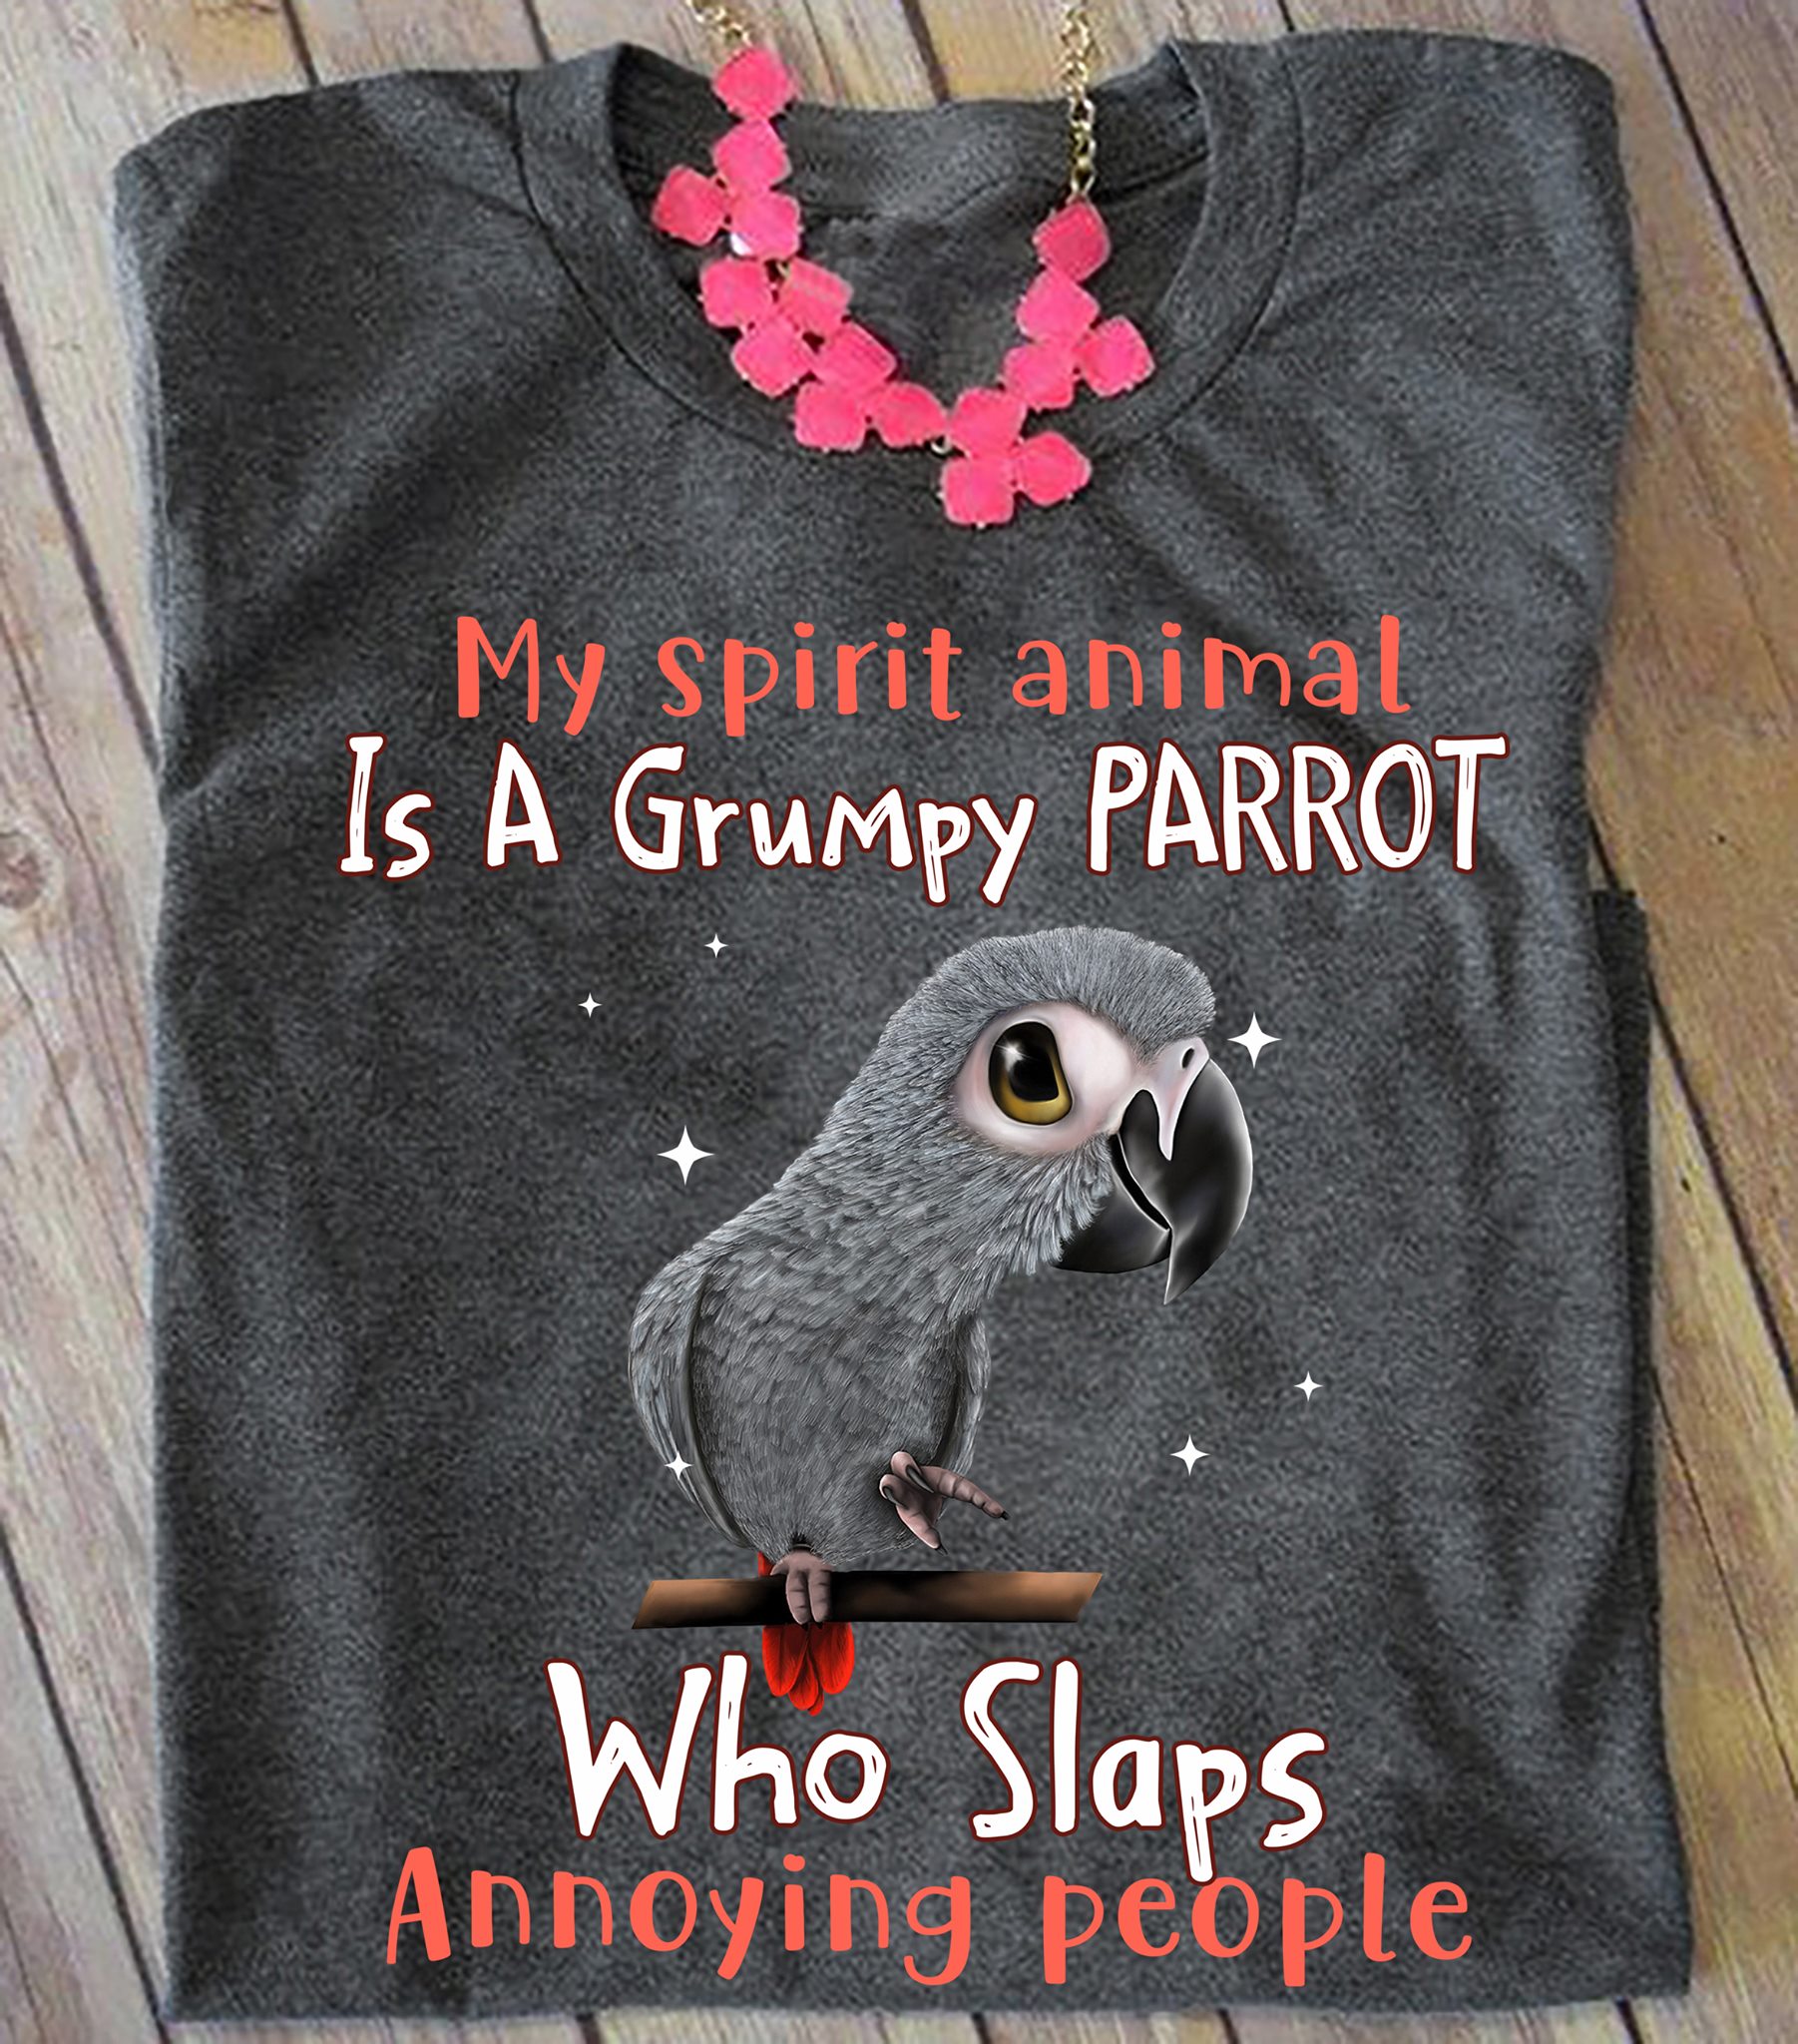 My spirit animal is a grumpy parrot who slaps annoying people